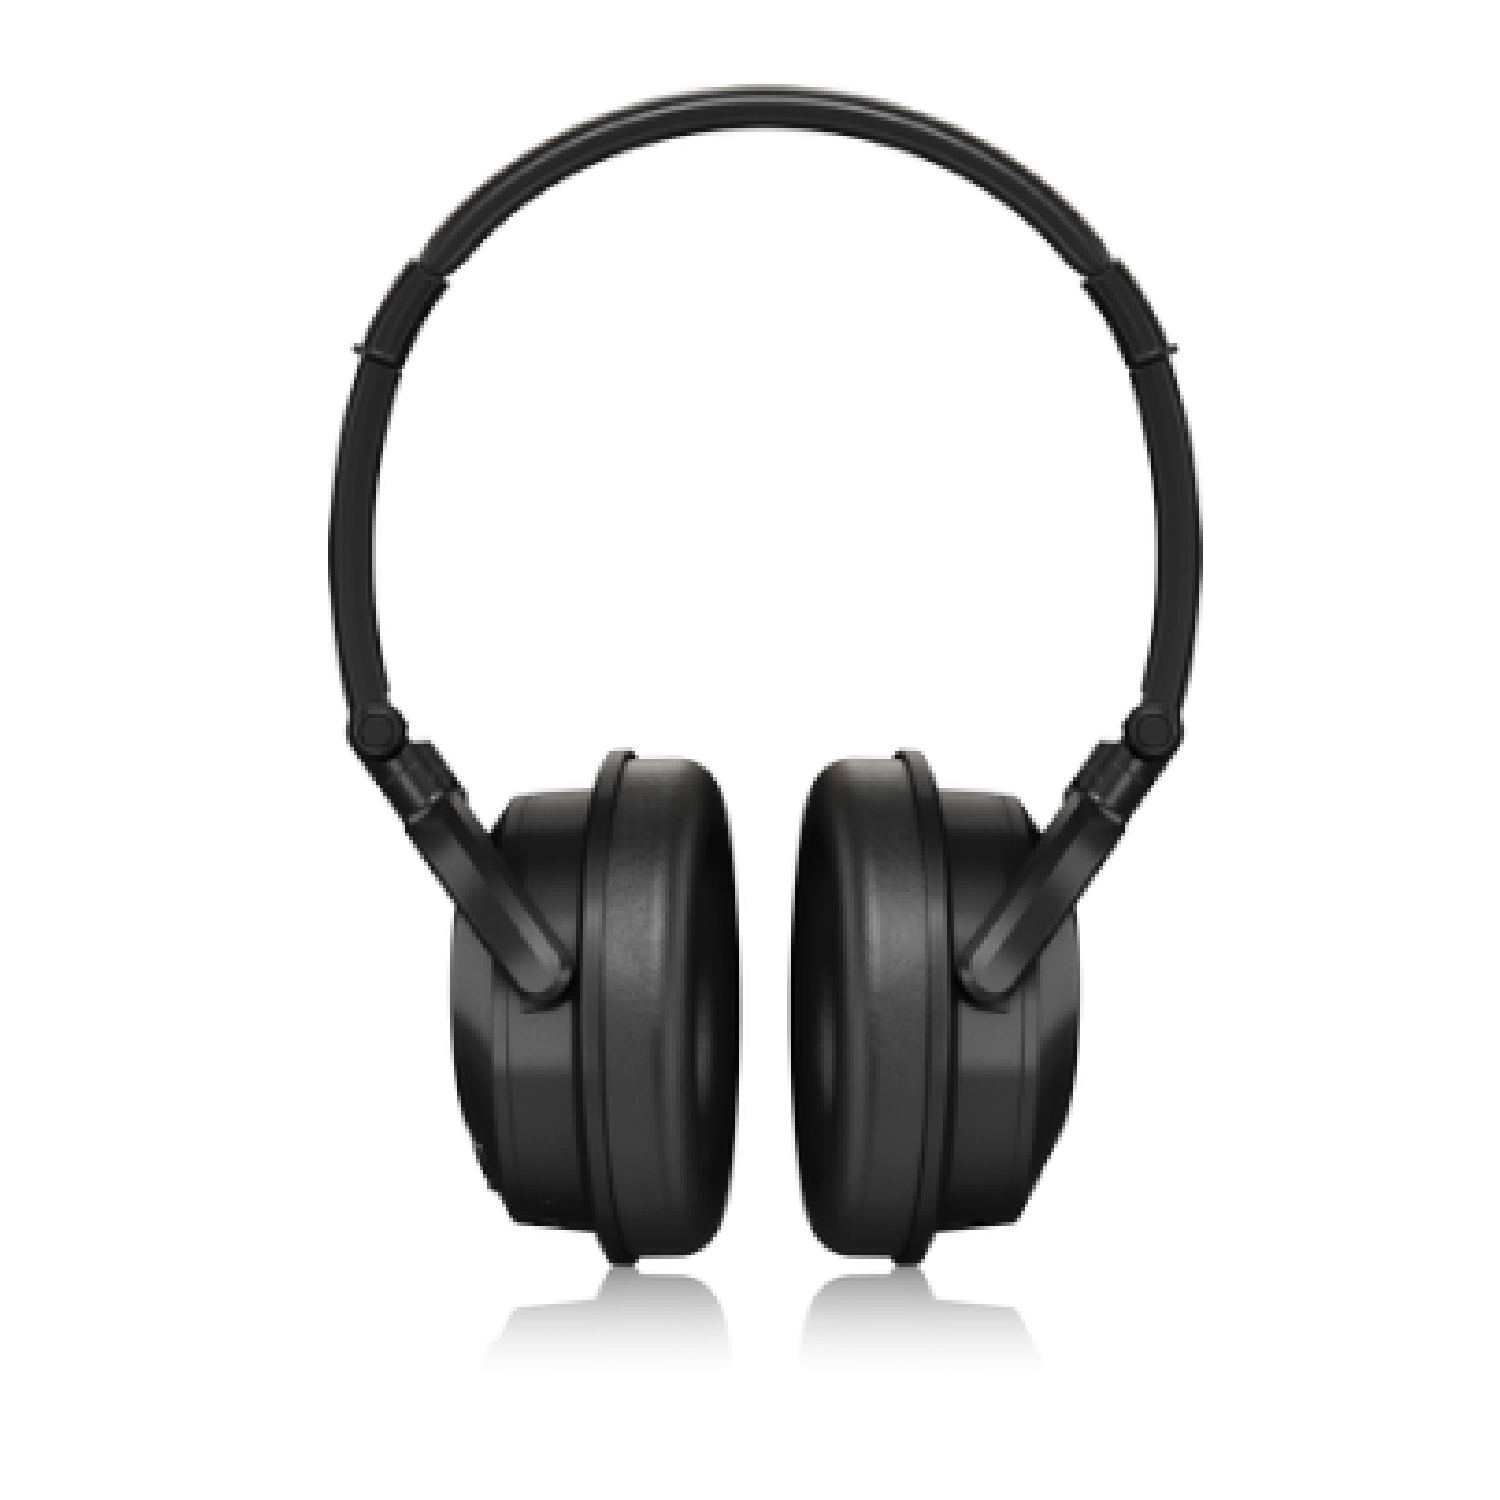 Wireless Active Noise Canceling Headphones with Bluetooth Connectivity   HC2000 BNC behringer